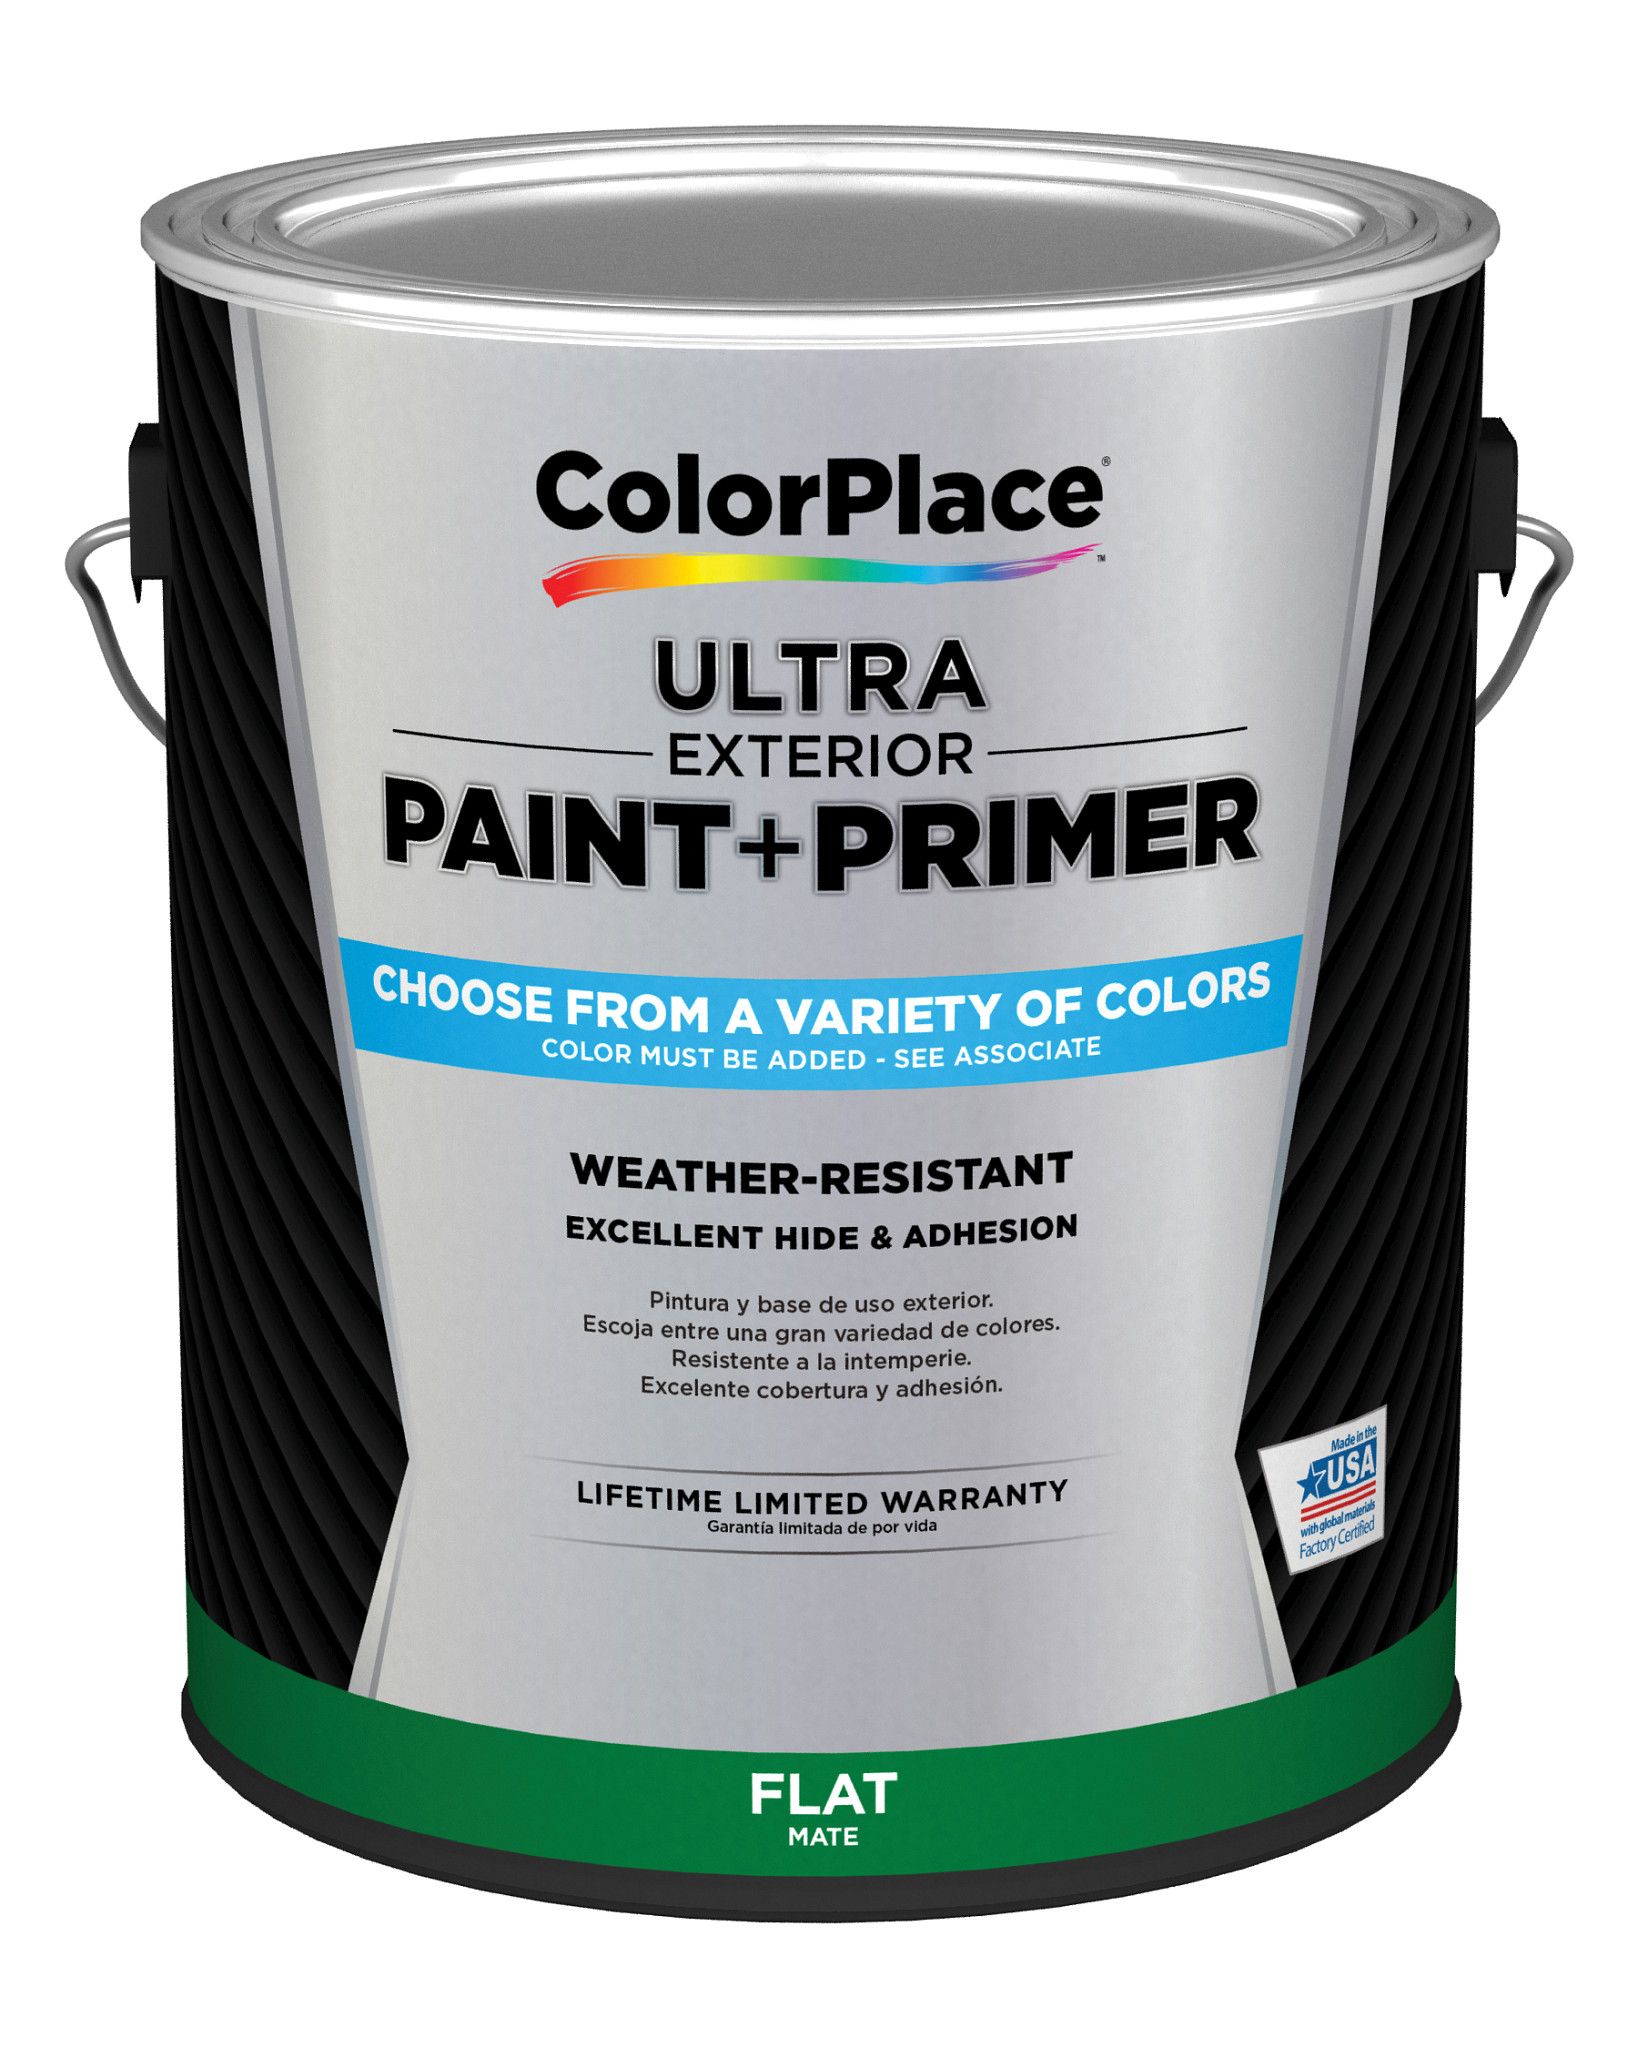 ColorPlace Ultra Exterior Paint & Primer, Amethyst Ice, Flat, 1 Gallon - image 4 of 11